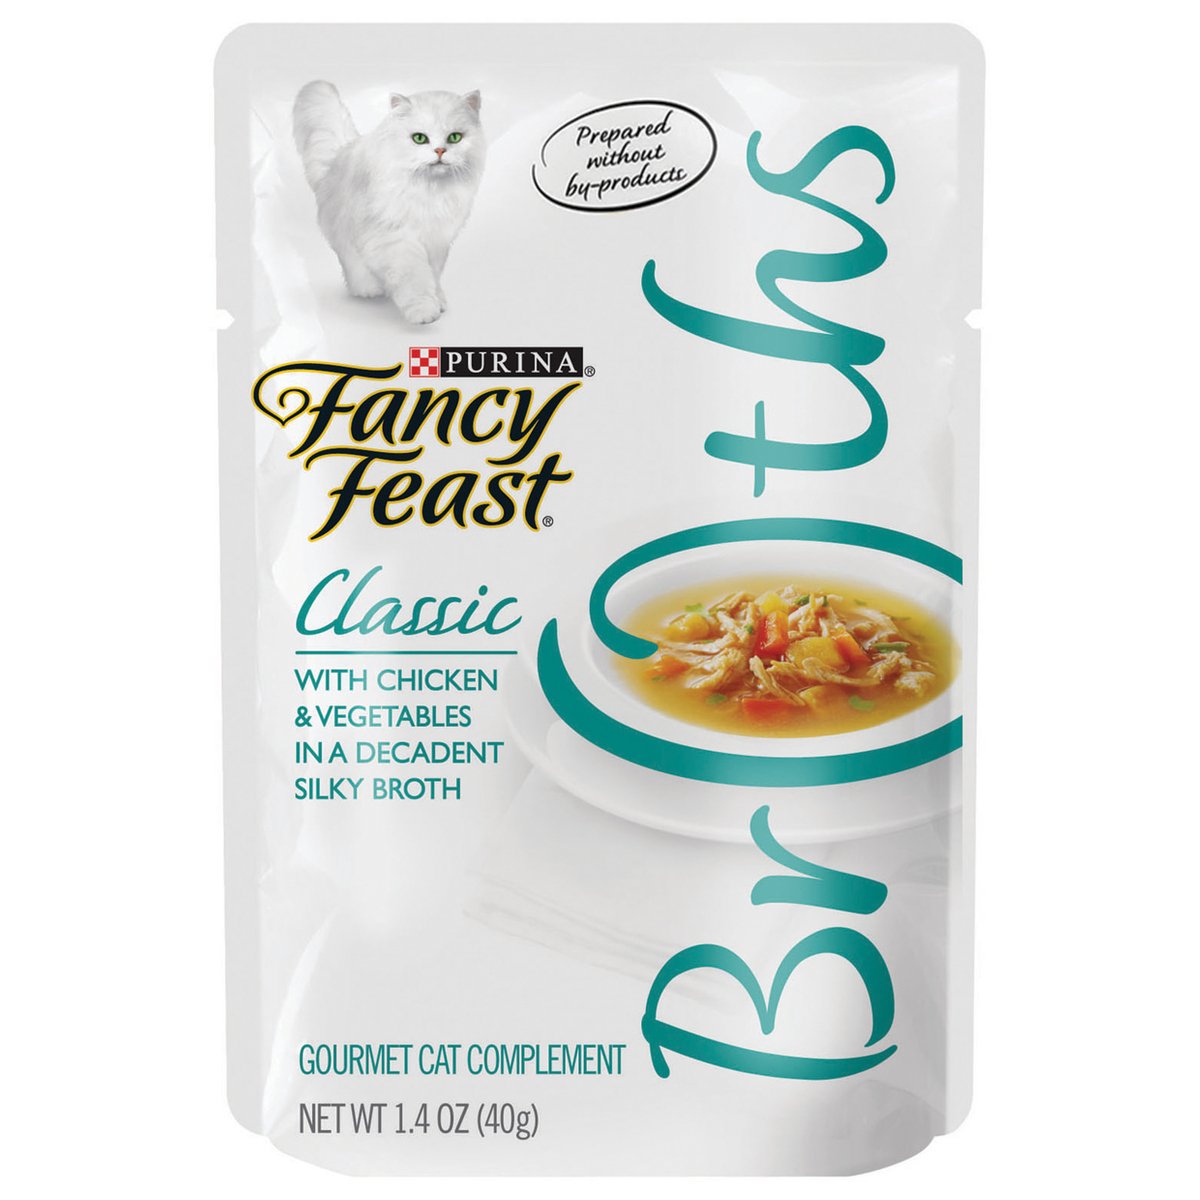 Purina Fancy Feast Cat Food Broths Chicken & Vegetable Classic 40g